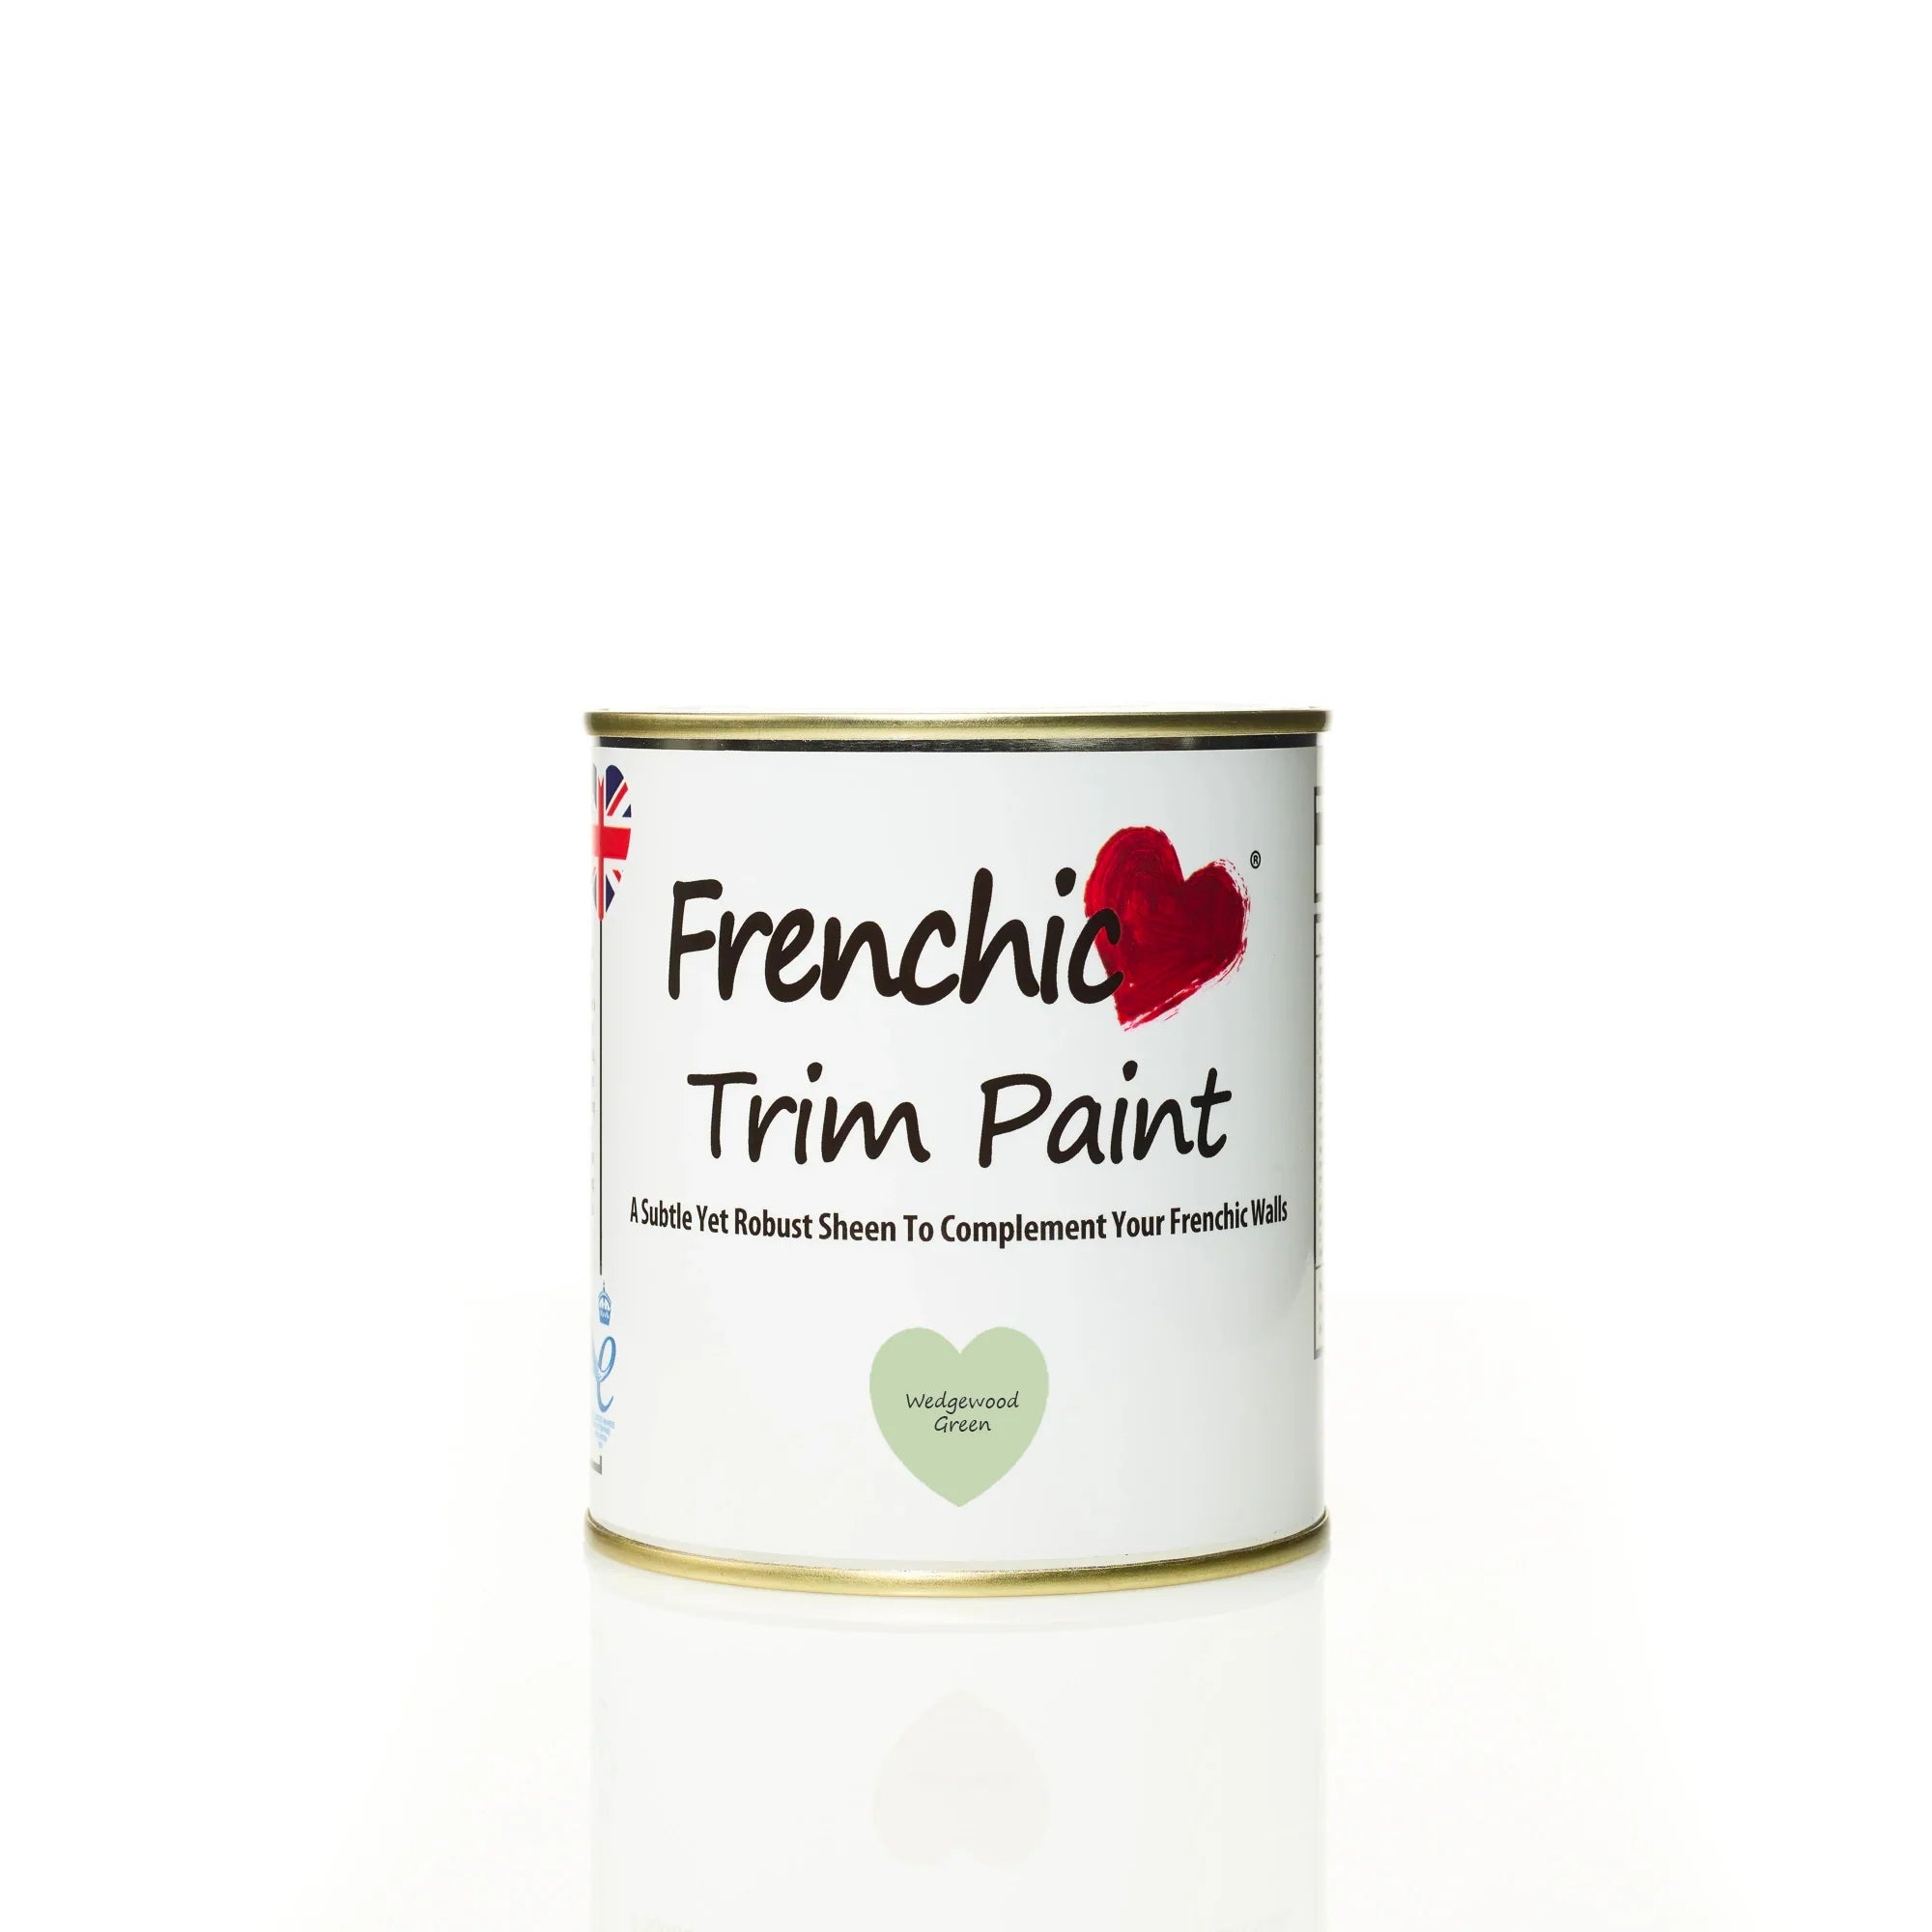 Frenchic Paint Wedgewood Green Trim Paint Frenchic Paint Trim Paint Range by Weirs of Baggot Street Irelands Largest and most Trusted Stockist of Frenchic Paint. Shop online for Nationwide and Same Day Dublin Delivery